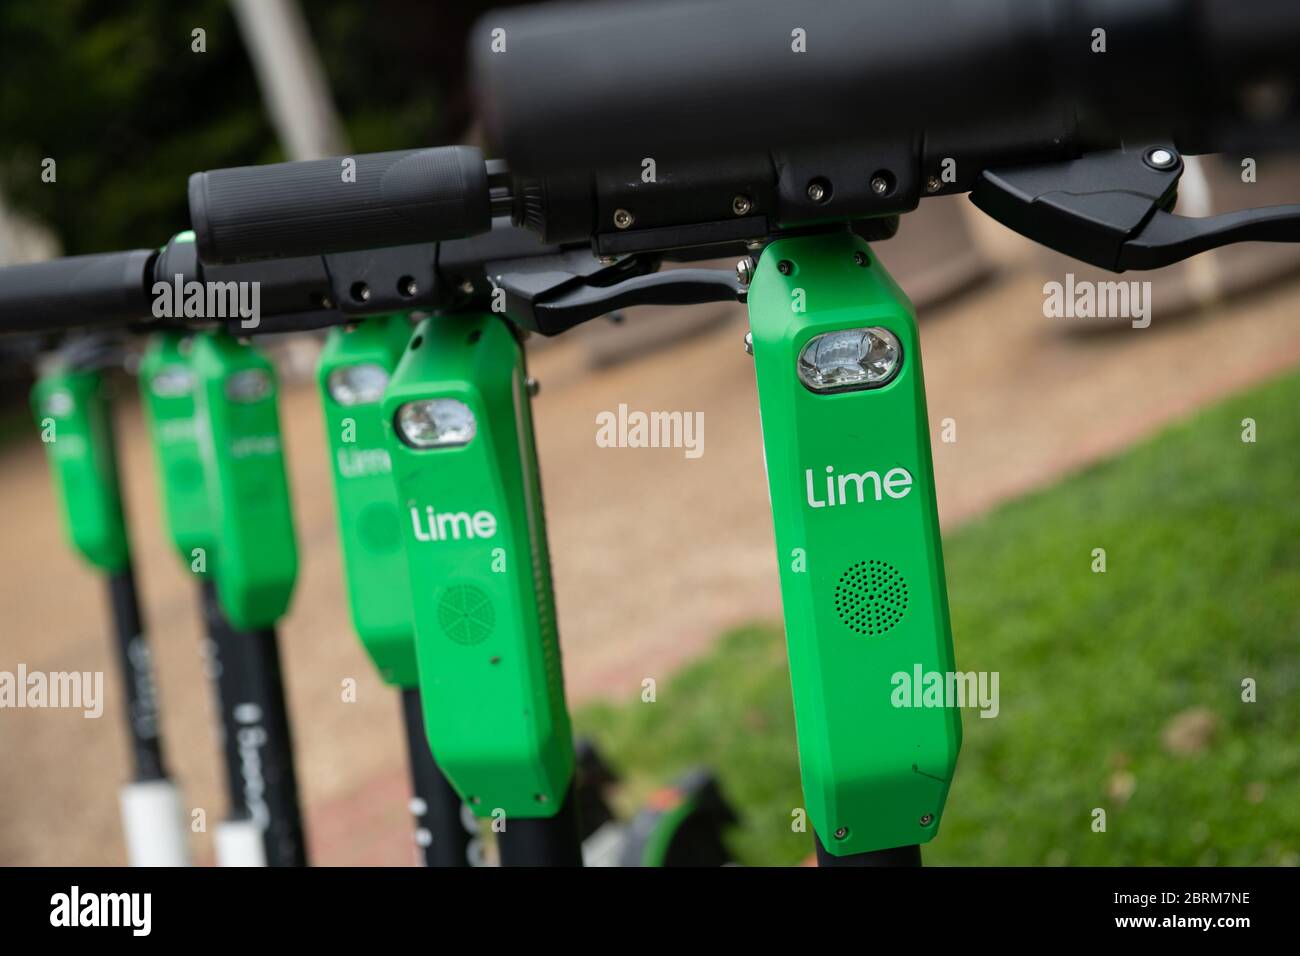 Washington, USA. 21st May, 2020. A general view of a line of Lime dock-less rental scooters in Washington, DC, on May 21, 2020 amid the Coronavirus pandemic. This week, the confirmed U.S. death toll from COVID-19 neared 100,000, while many states push to reopen their economies despite not meeting requirements recommended by public health experts for safe reopening. (Graeme Sloan/Sipa USA) Credit: Sipa USA/Alamy Live News Stock Photo